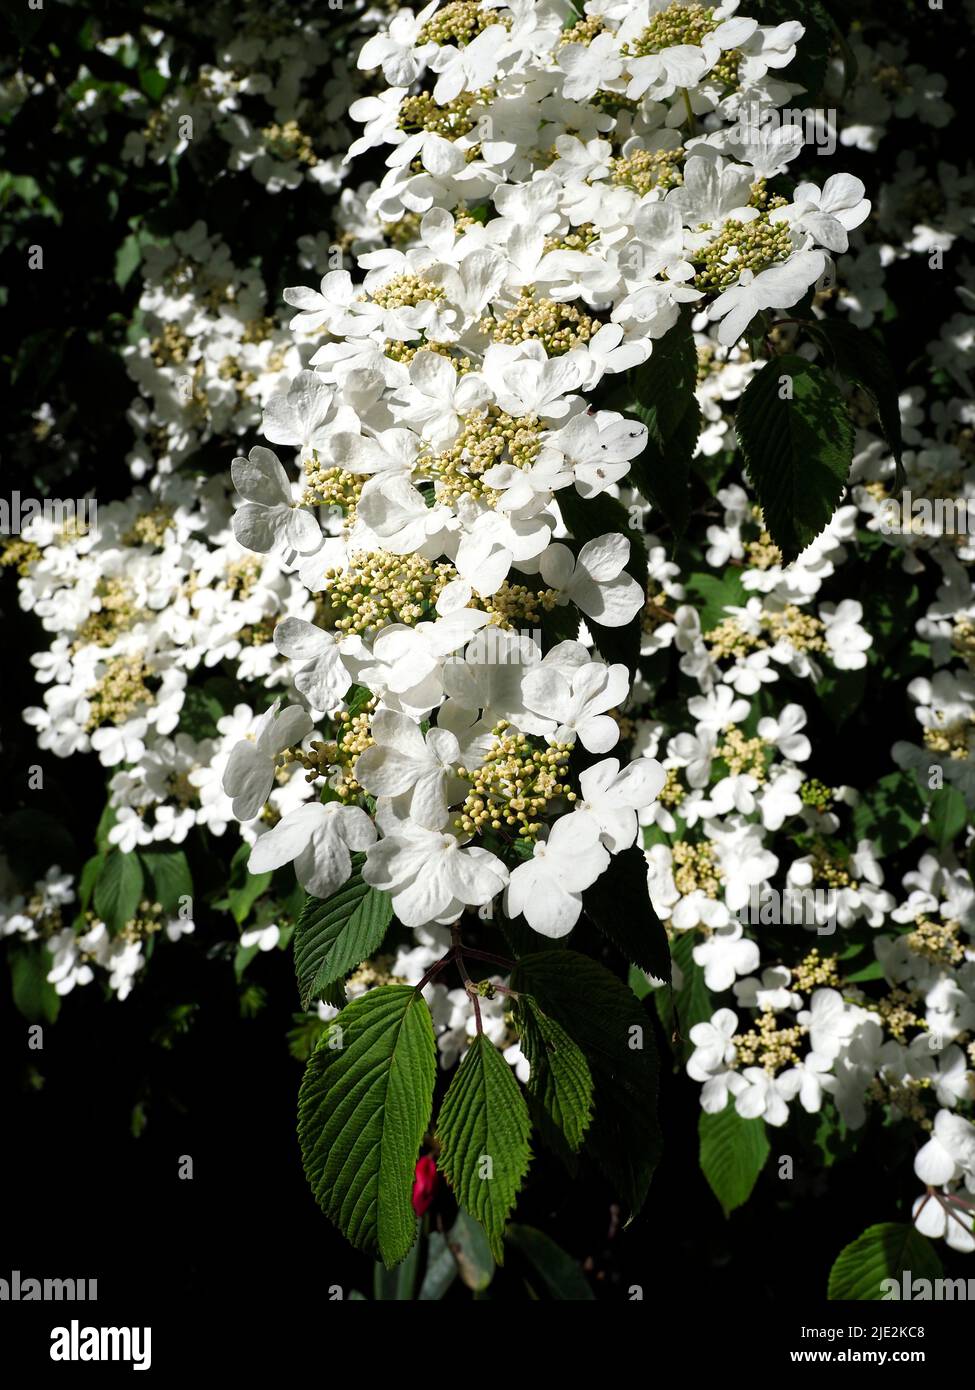 Viburnum plicatum is a species of flowering plant in the family Adoxaceae (formerly Caprifoliaceae), native to mainland China, Korea, Japan,Taiwan Stock Photo